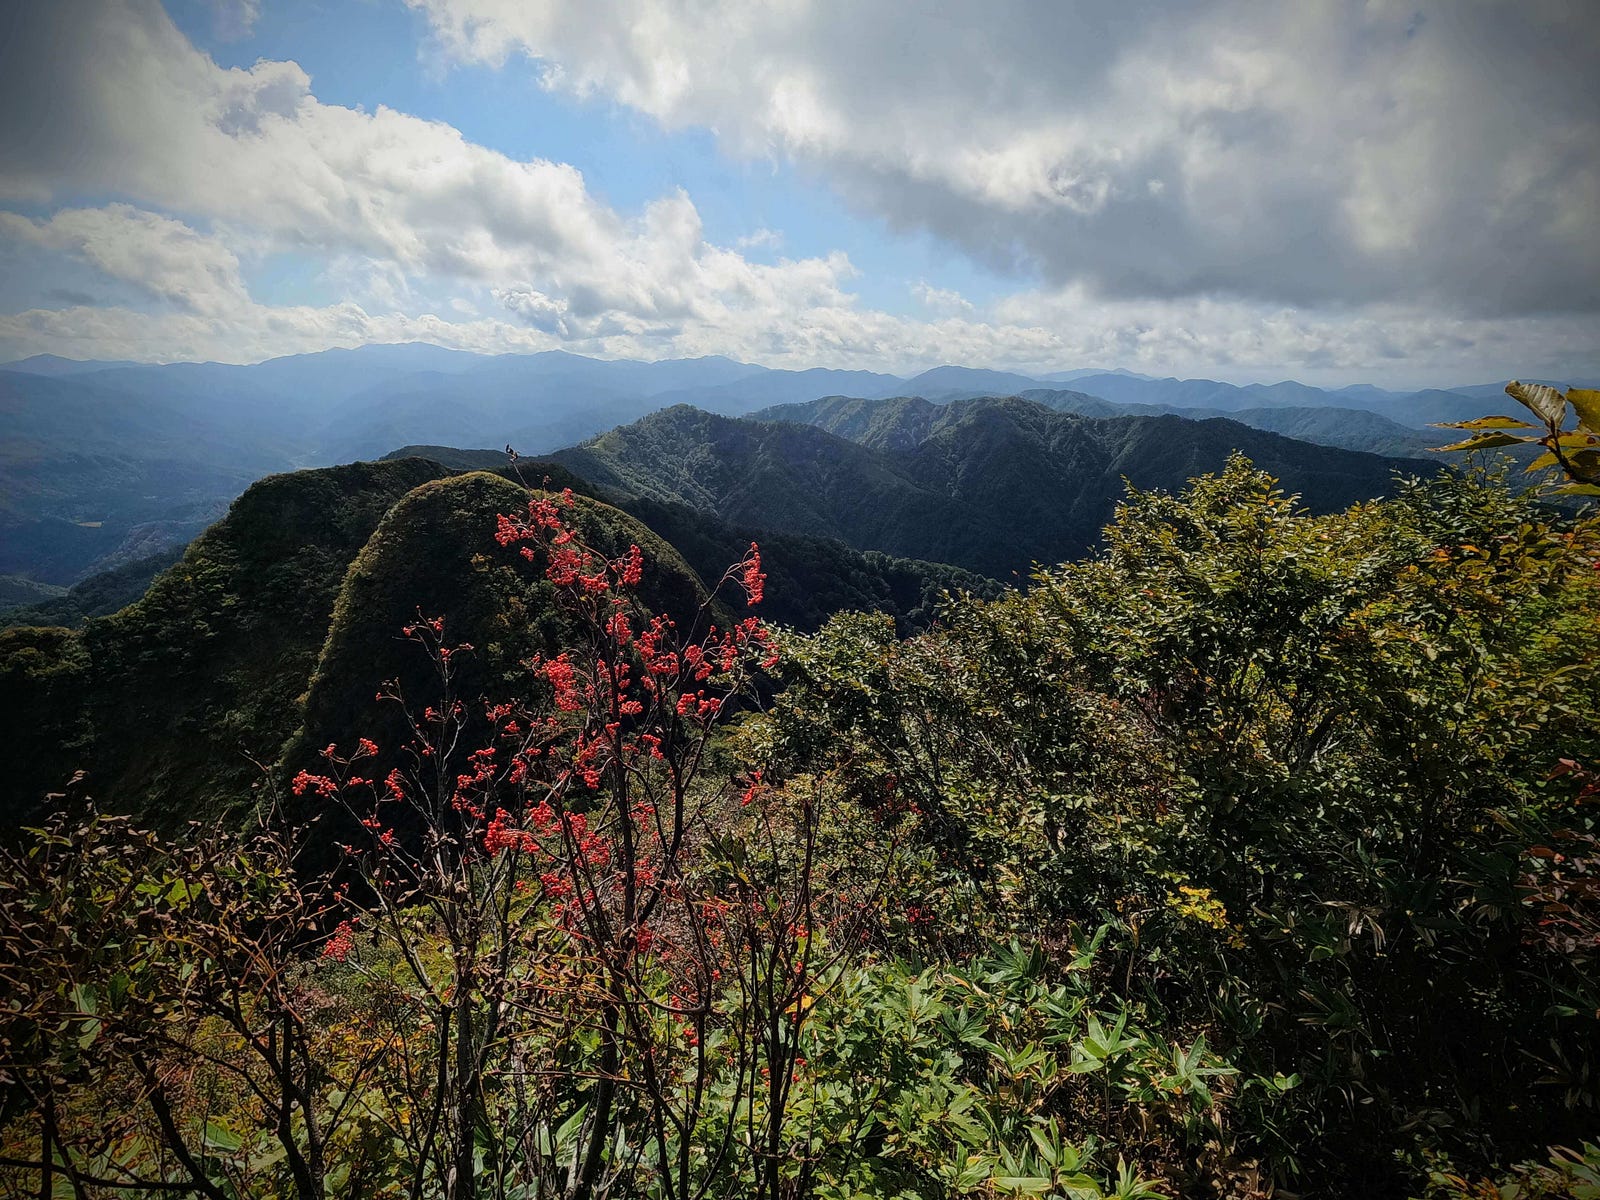 View over the surrounding mountains getting ready to change for the autumn, with a bright blue sky covered in ominous clouds at the summit of Mt. Maya, one of the 100 Famous Mountains of Yamagata